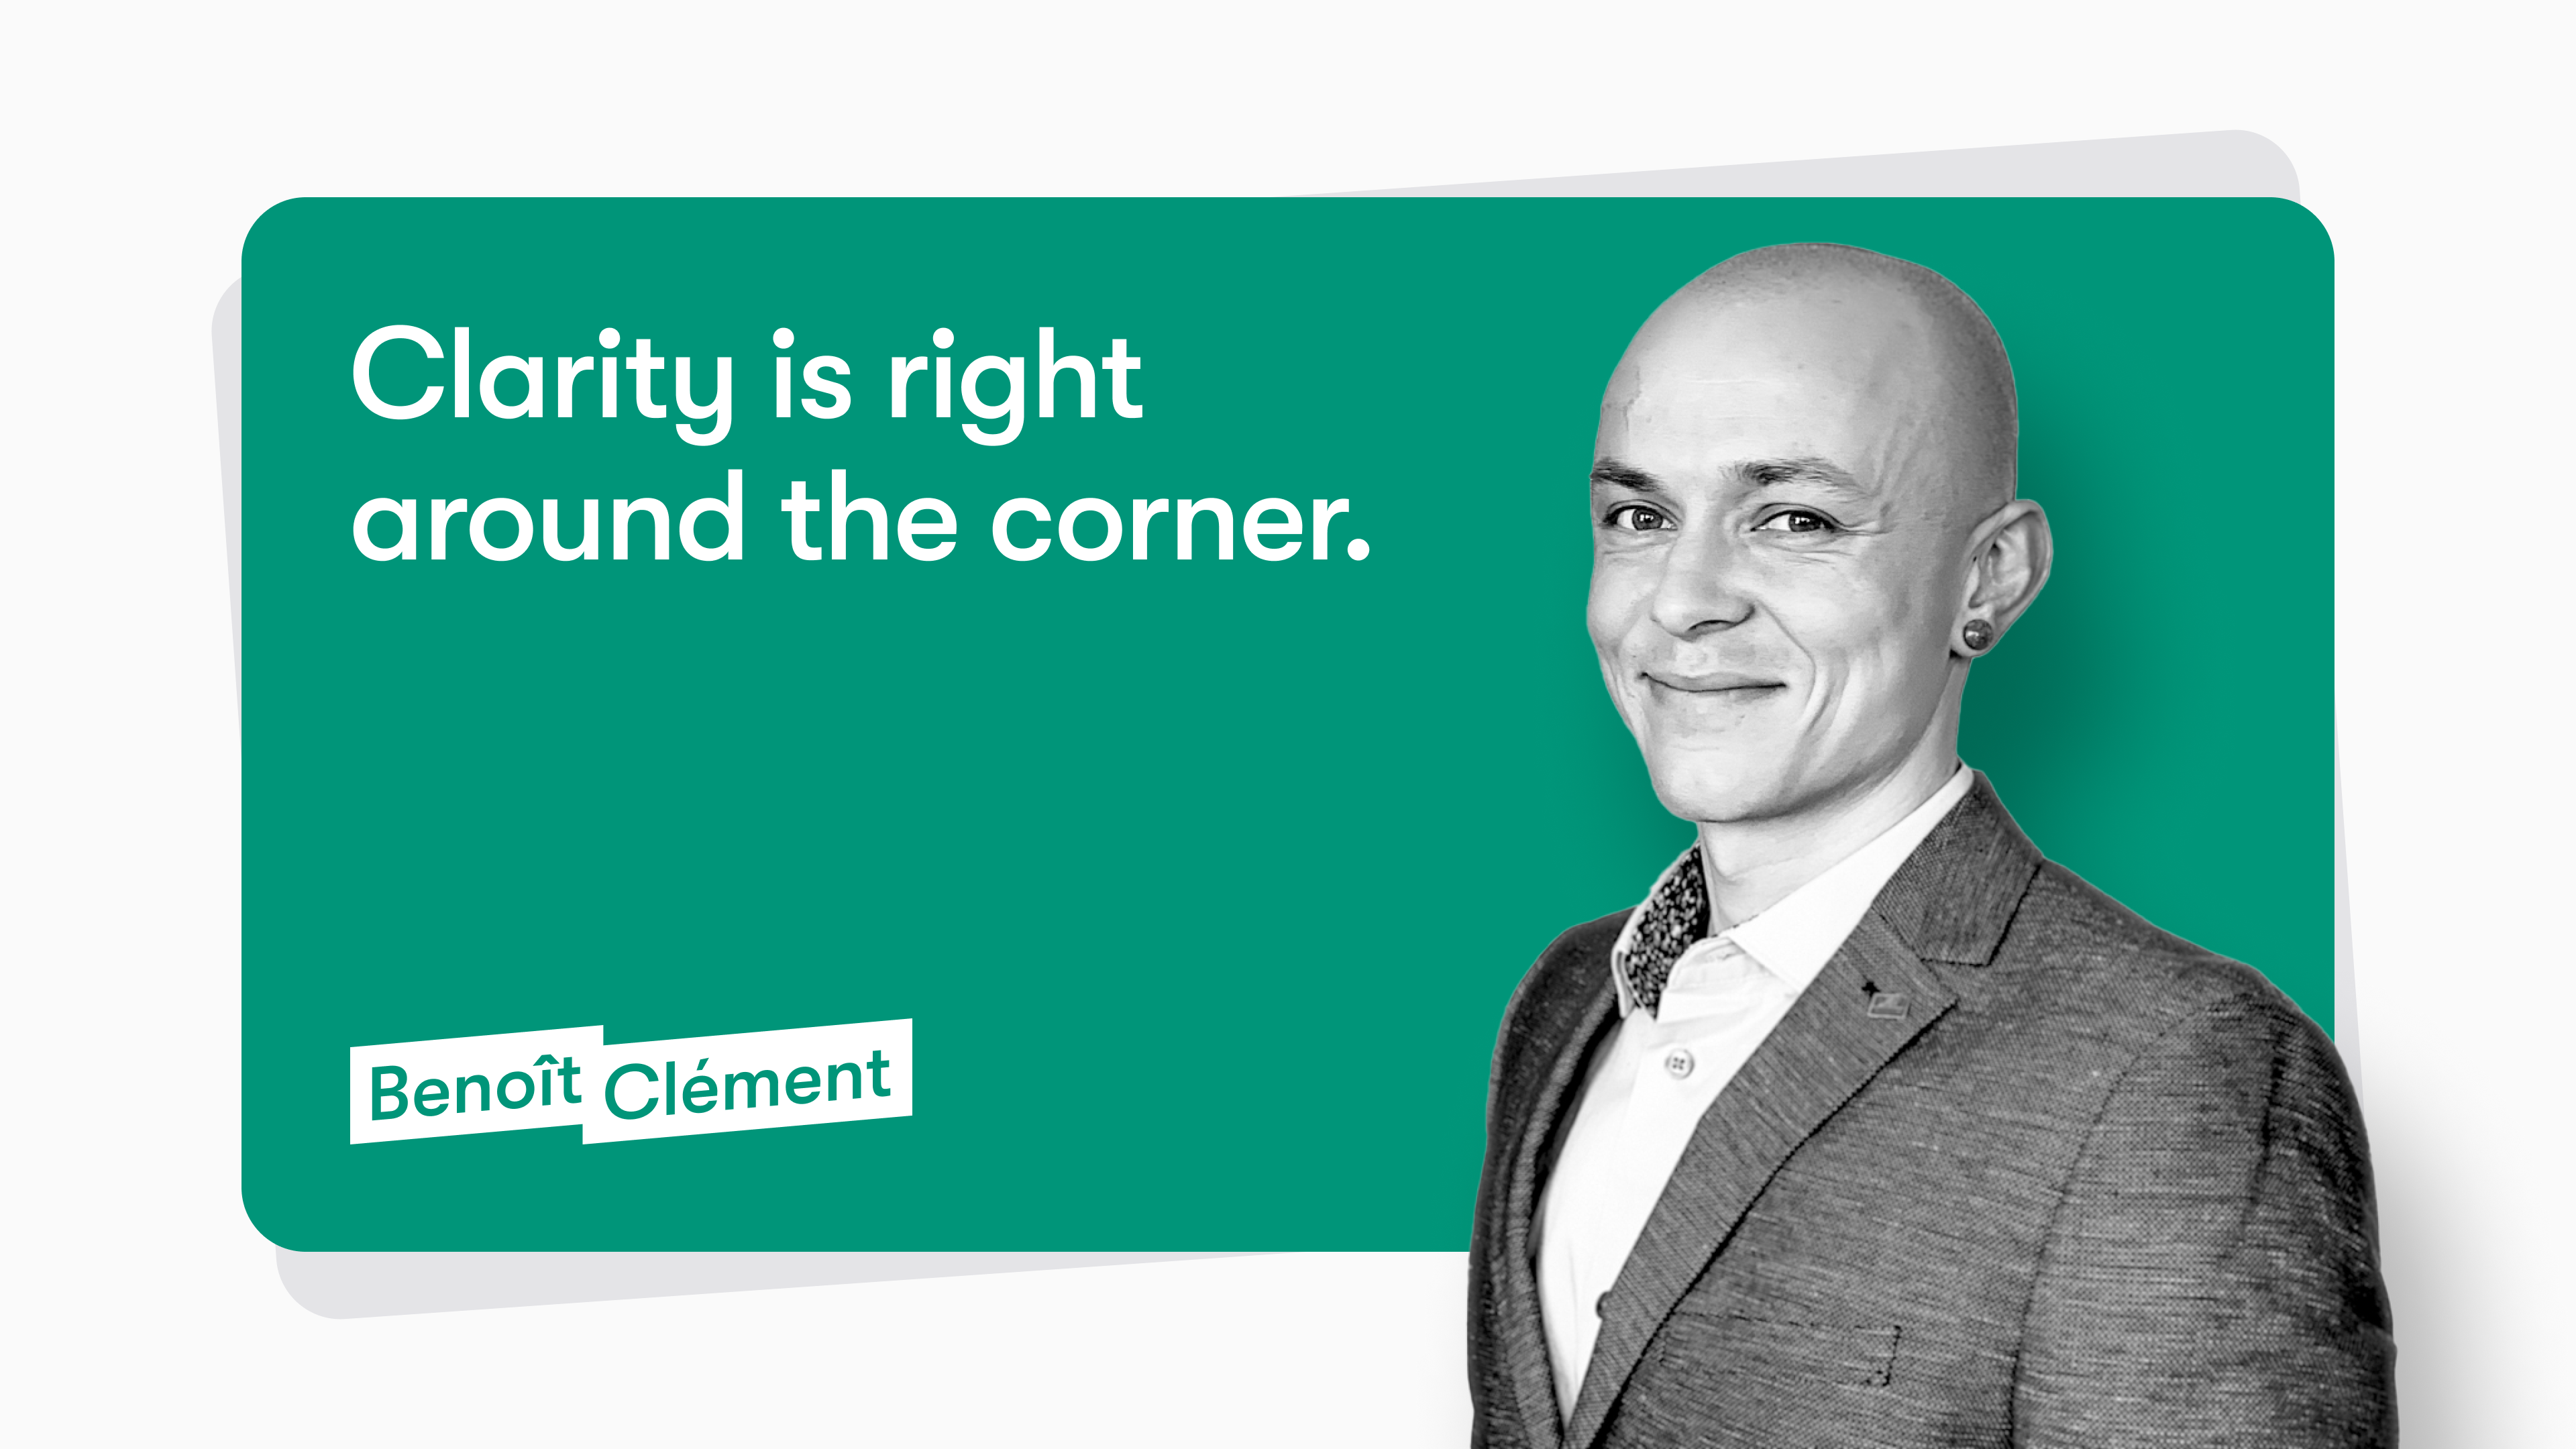 Photo of Benoît Clément next to a green box that says “Clarity is right around the corner,” with Benoît's logo in the bottom left corner.